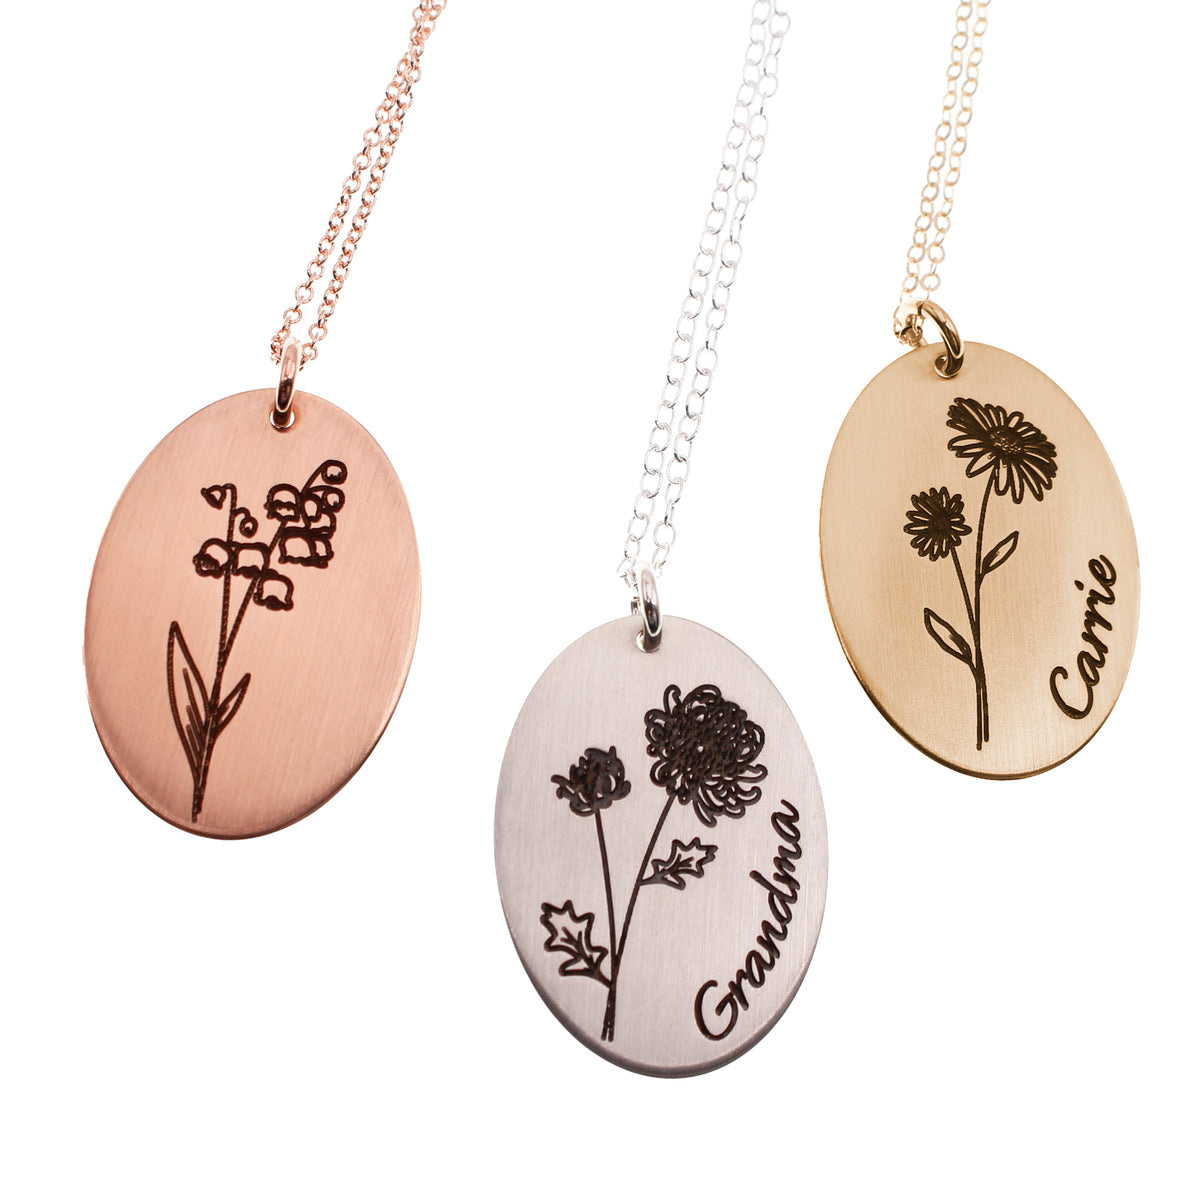 Oval Birth Flower Necklace - Rose Gold - Love It Personalized